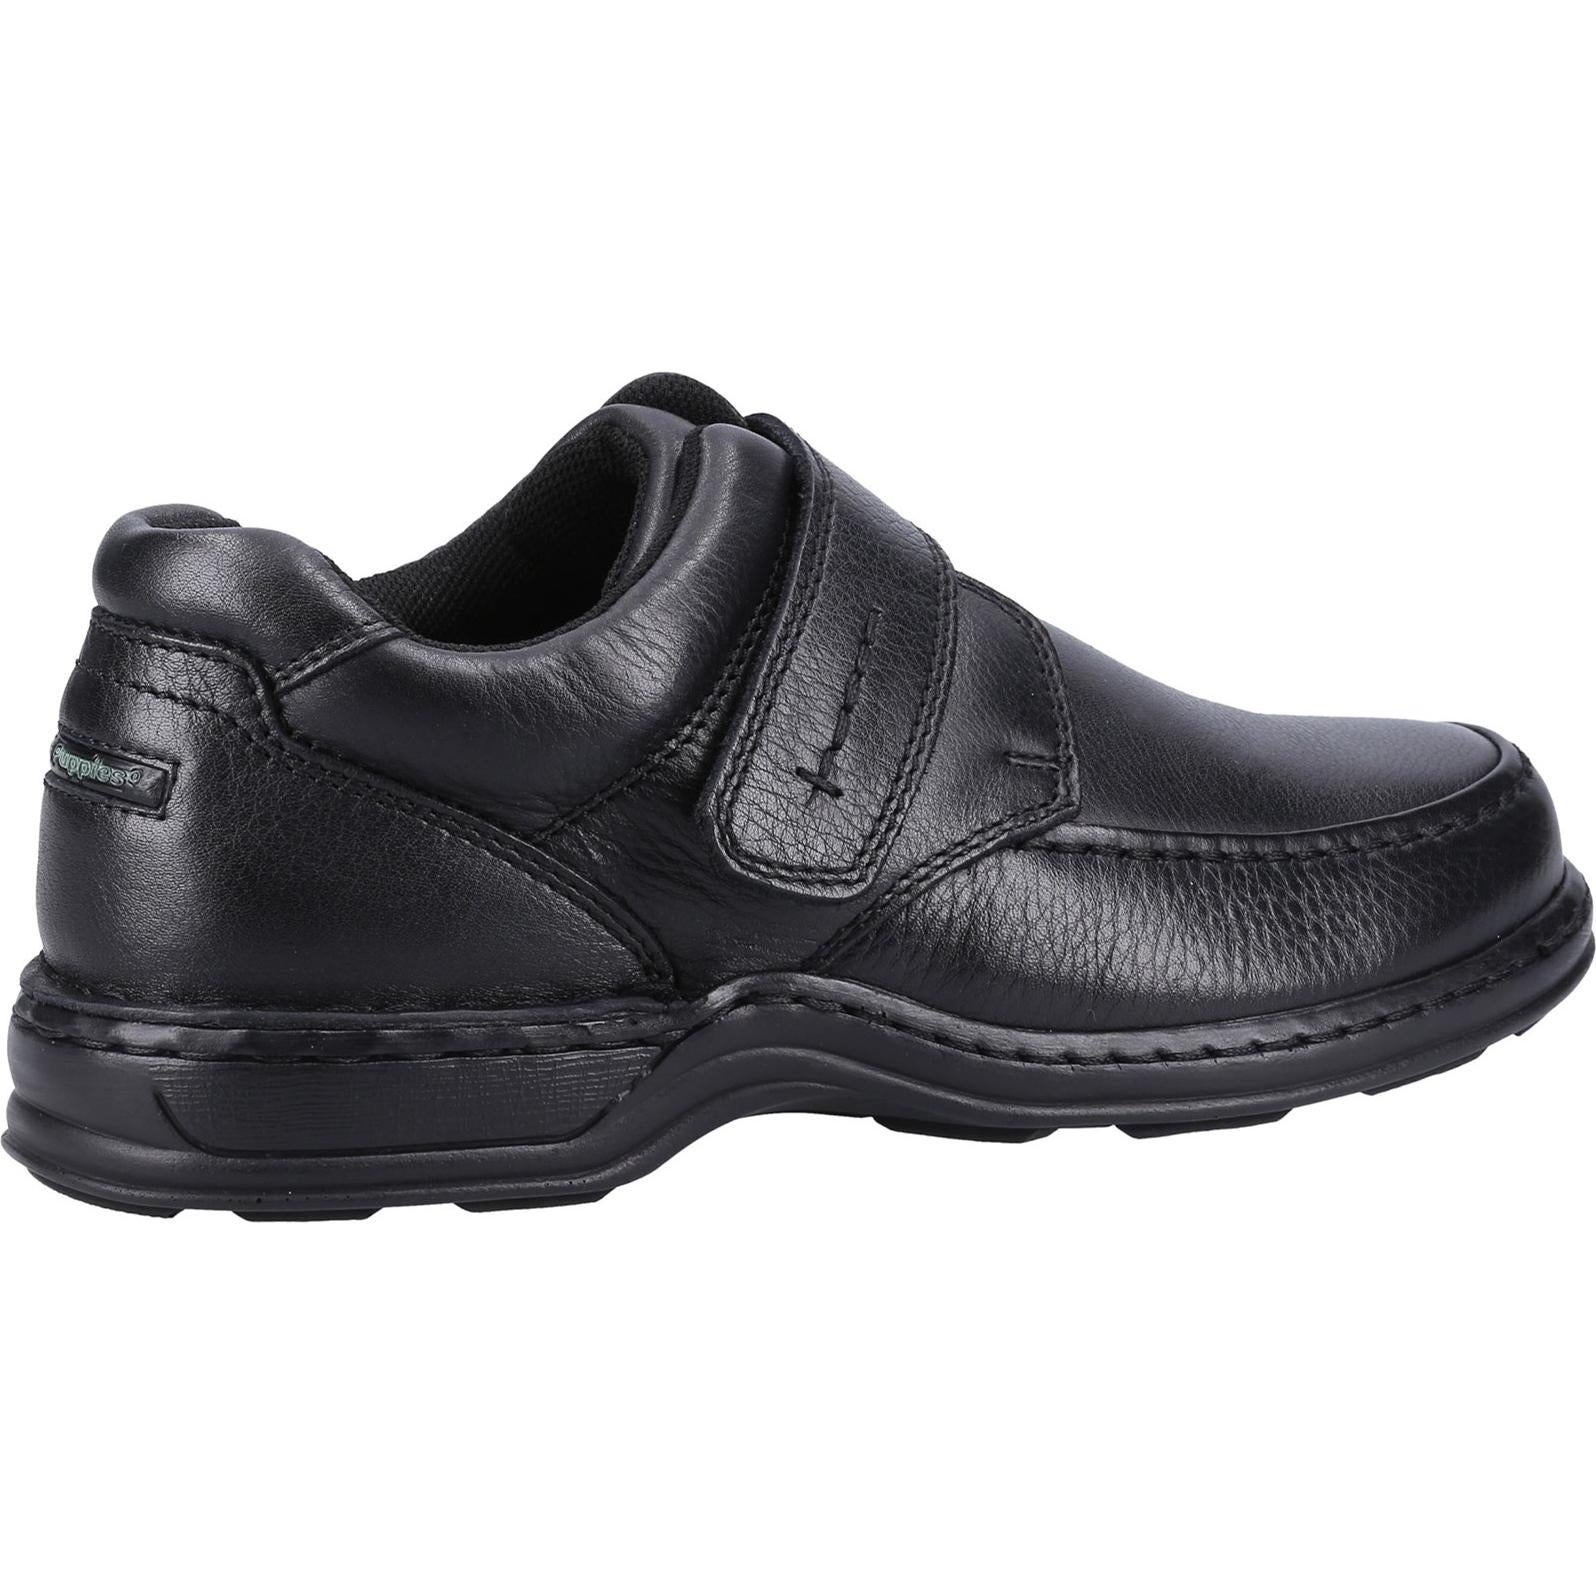 Hush Puppies ROMAN Touch Fastening Shoes